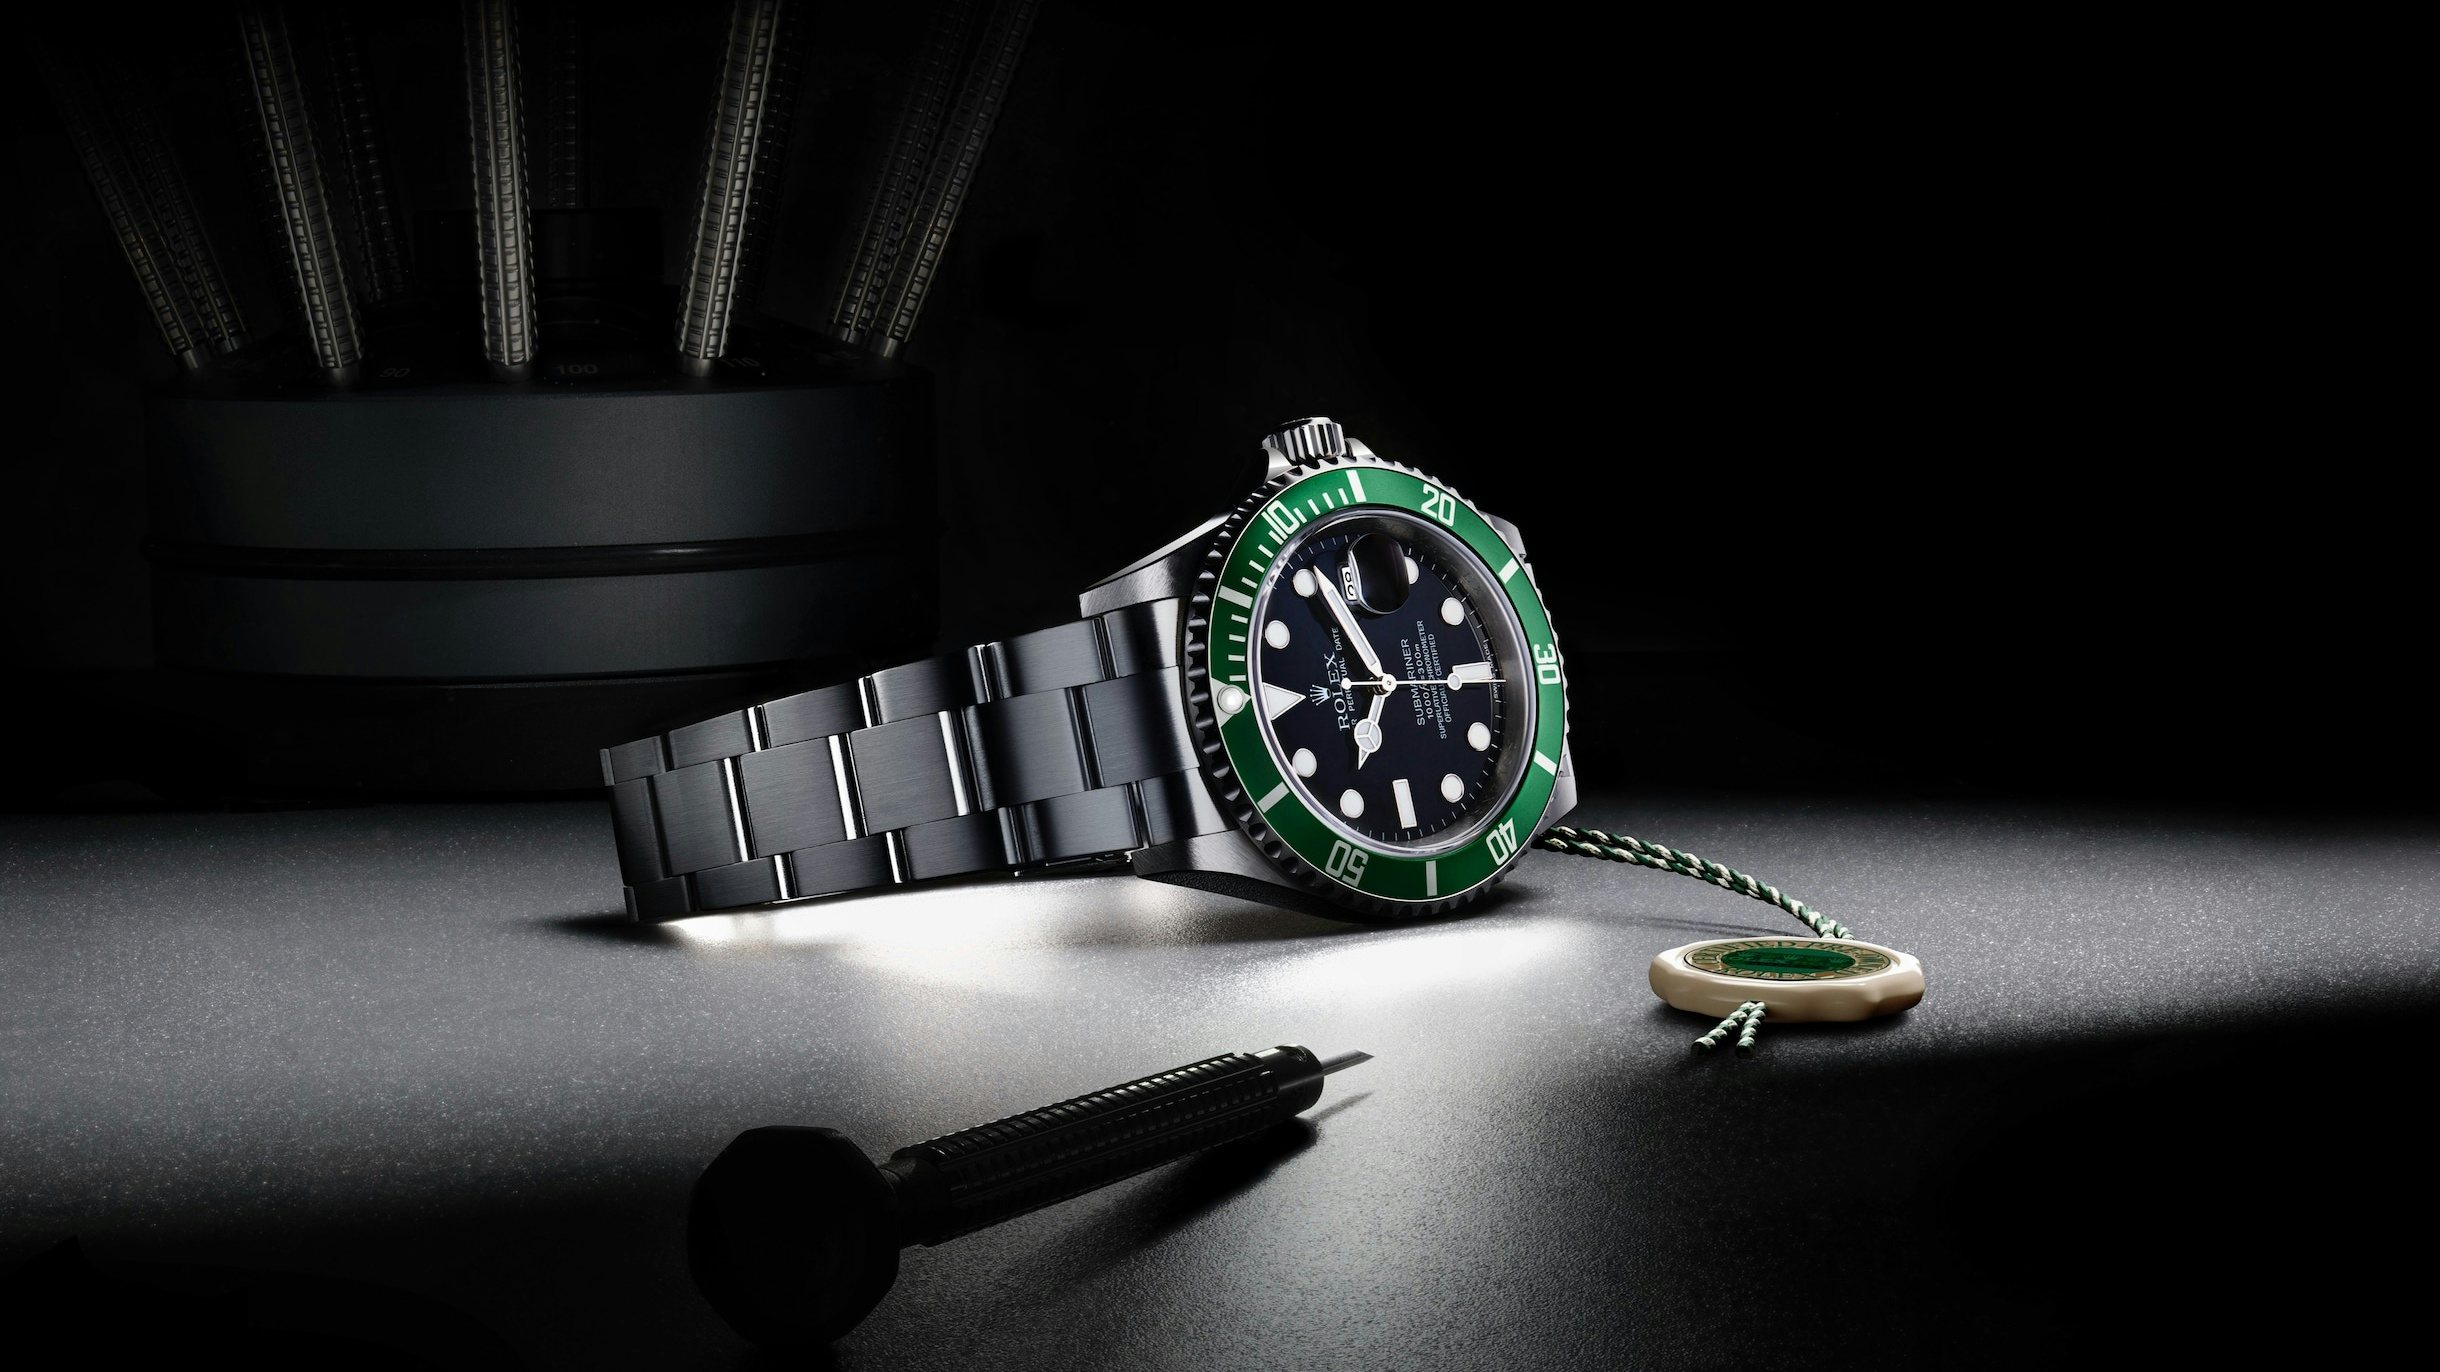 Rolex's purchase of Bucherer sets the stage for a new era in luxury watch retailing. Here's what it could mean for Rolex and its competitors. Photo: Rolex